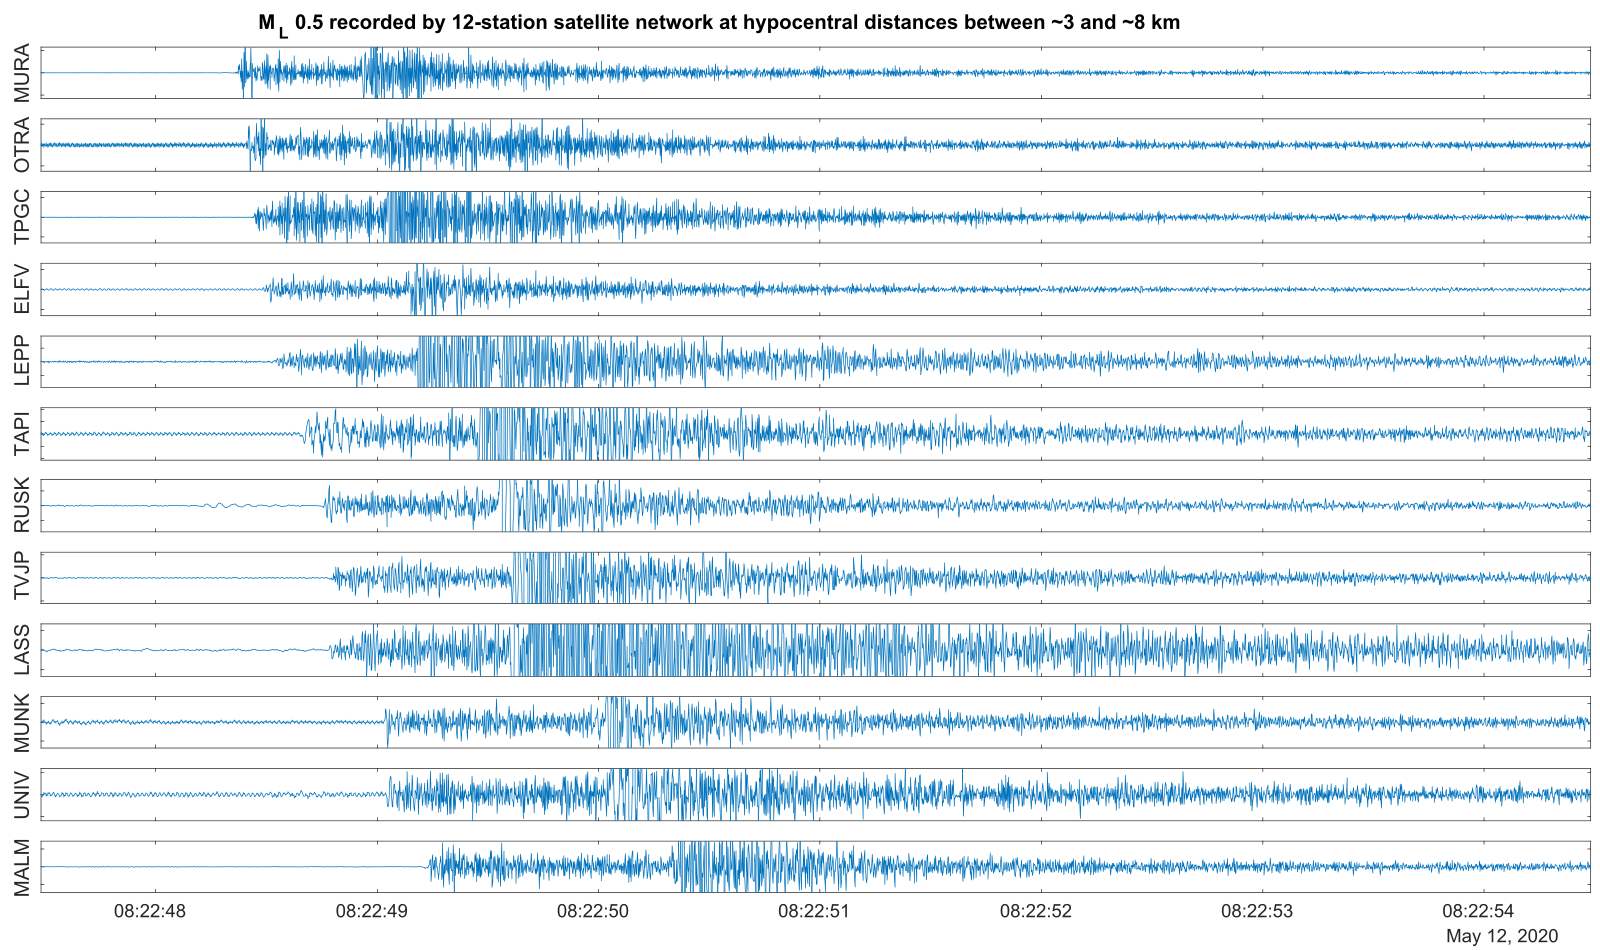 Small ML0.5 earthquake recorded by 12 seismic stations equipped with our AG4.5 sondes across Espoo and Helsinki